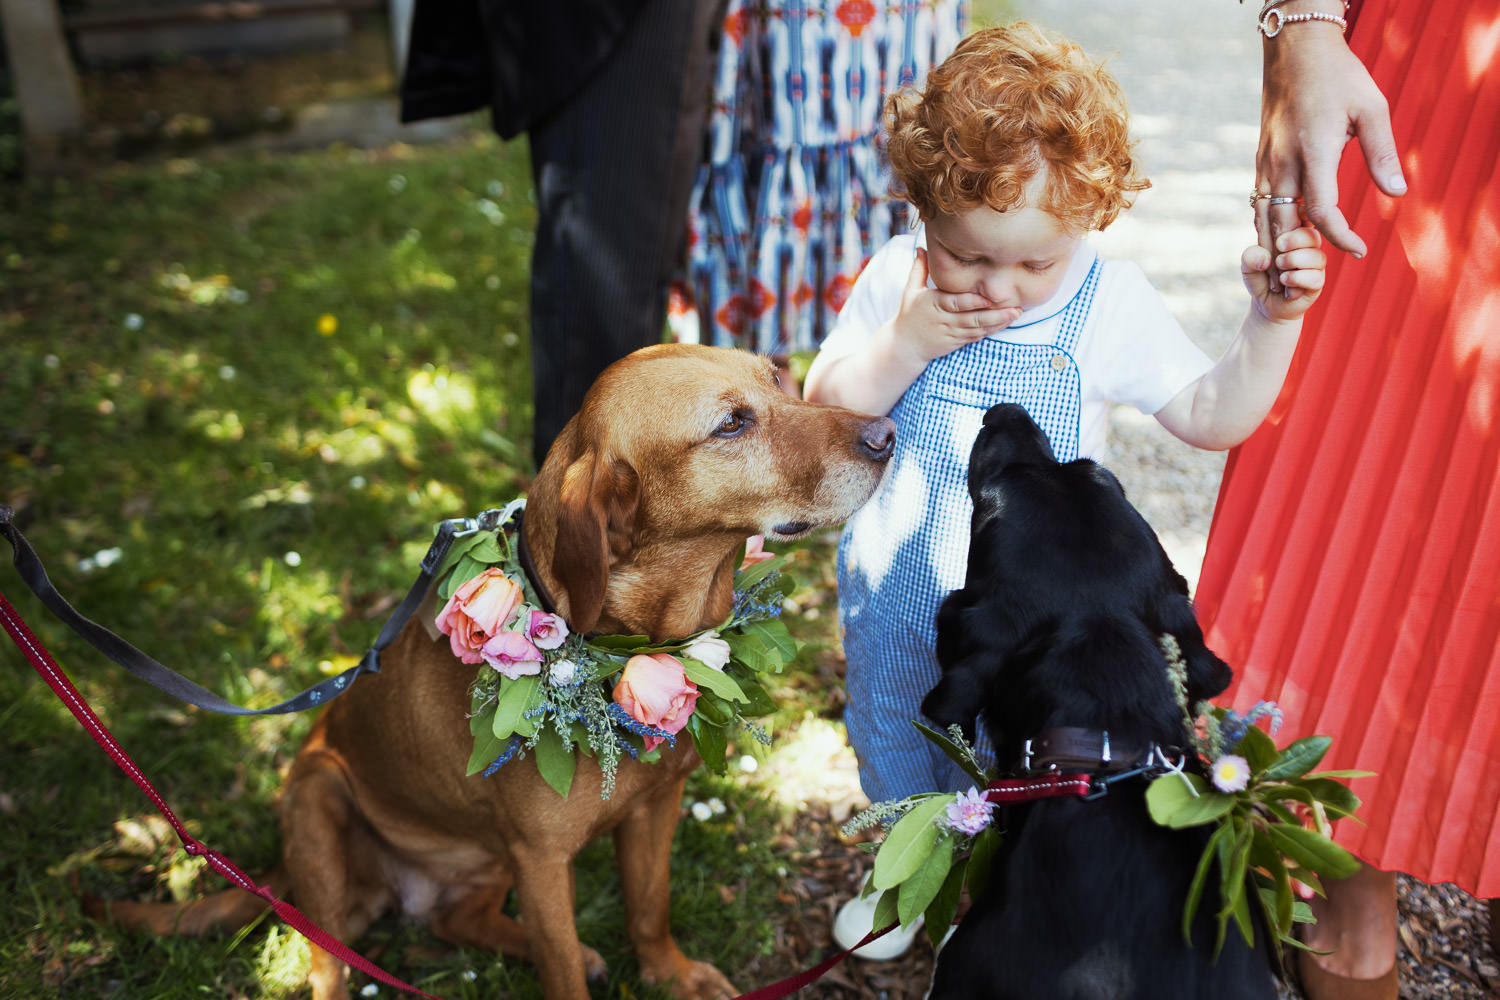 A toddler in blue checked dungarees blows kisses to two dogs at a wedding.